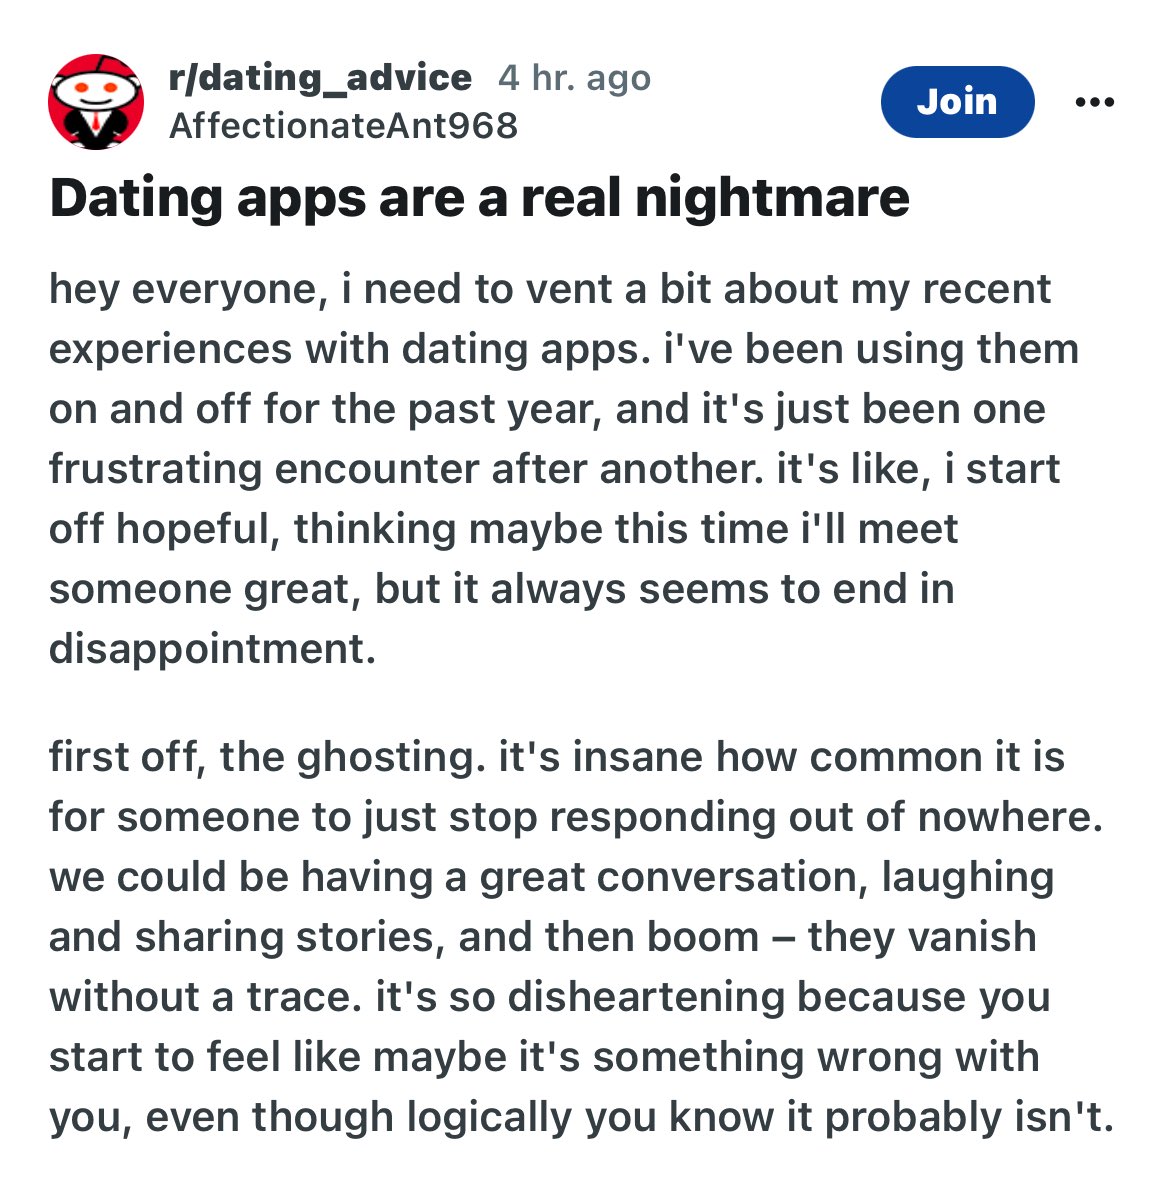 Ghosting in a civilized world is a NEXT DAY THING— now you’re ghosted mid conversation like an animal